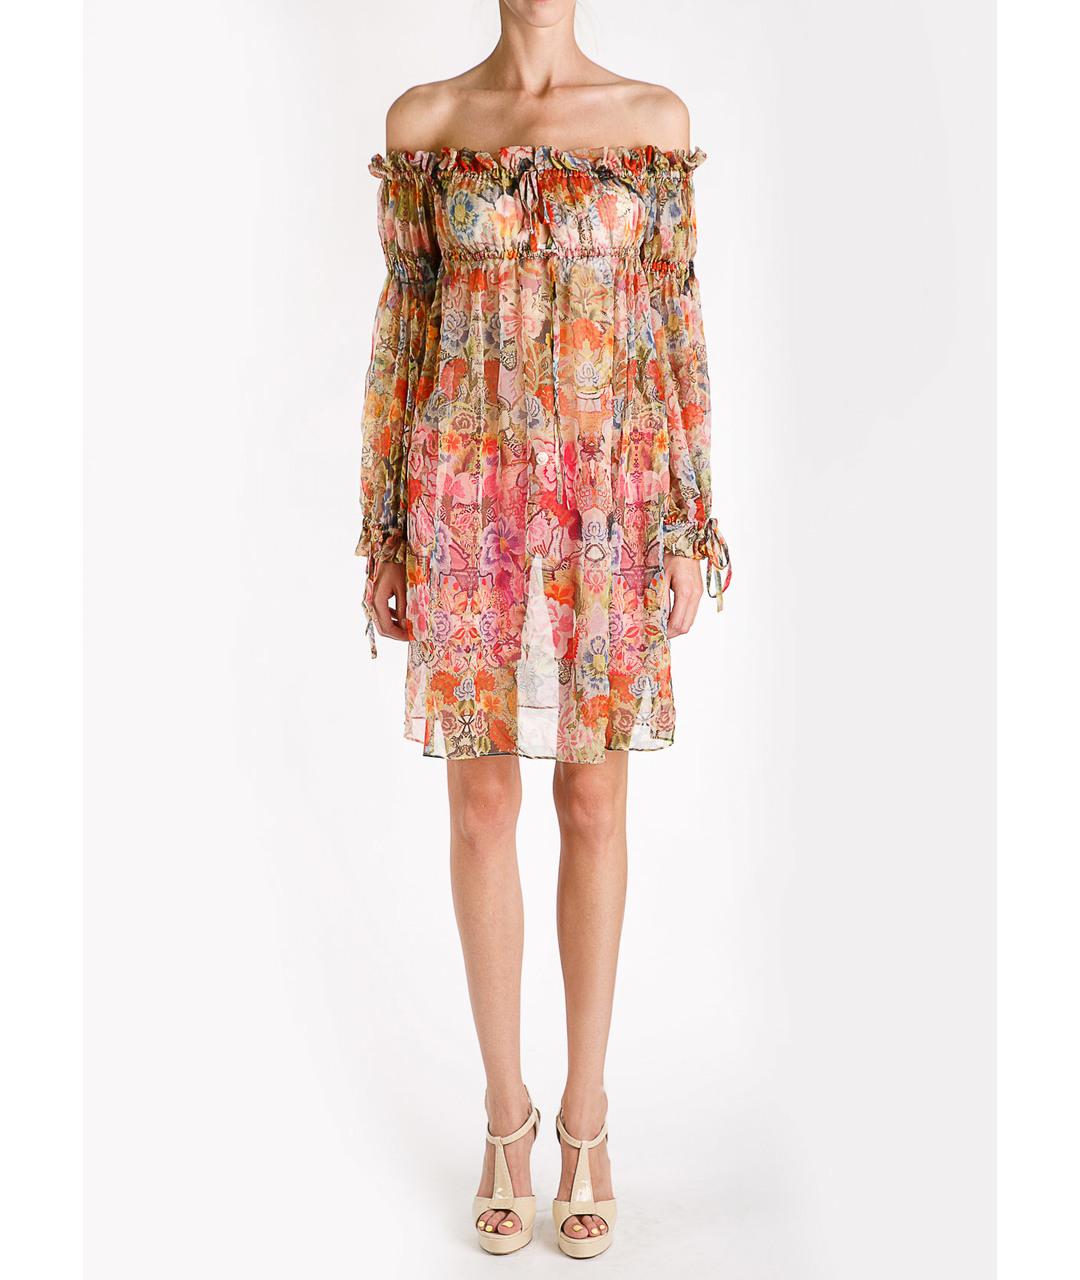 Alexander McQueen 

This model is a tunic dress made of flying fabric. 
Crafted in vibrant summer colors and great for hot weather thanks to its off-the-shoulder

Size: IT 44 - US 10
Size: IT 46 - US 12
Size: IT 48 - US 14




 

Brand new, with